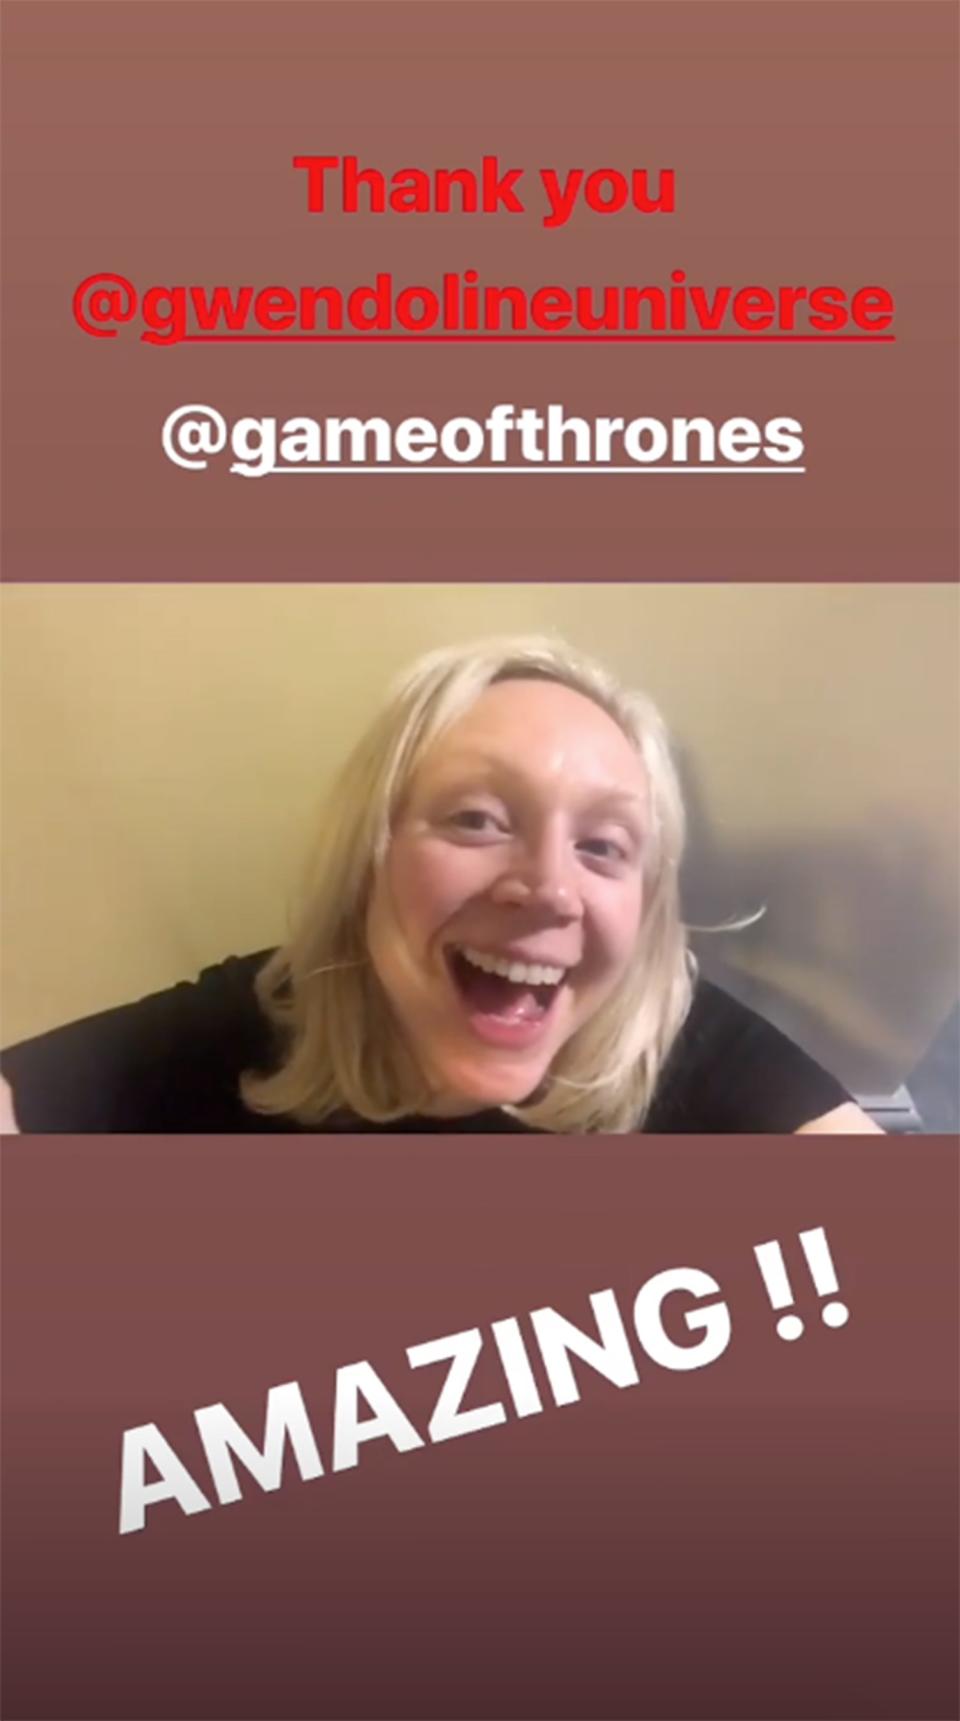 The former soccer star and massive <em>Thrones</em> fan got a very special surprise birthday message from Gwendoline Christie, who plays Brienne of Tarth, that blew him away. "I can't believe this ]]>🙌